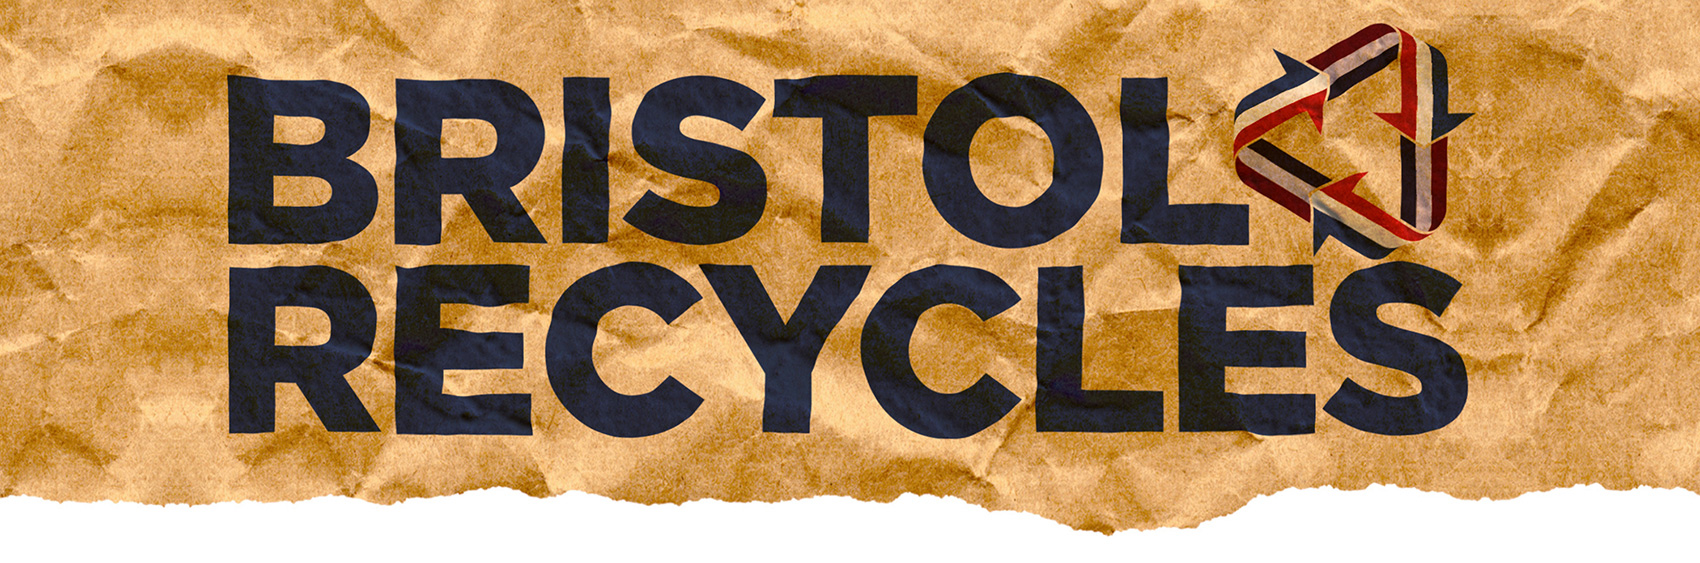 Bristol Recycles logo on crumpled up paper